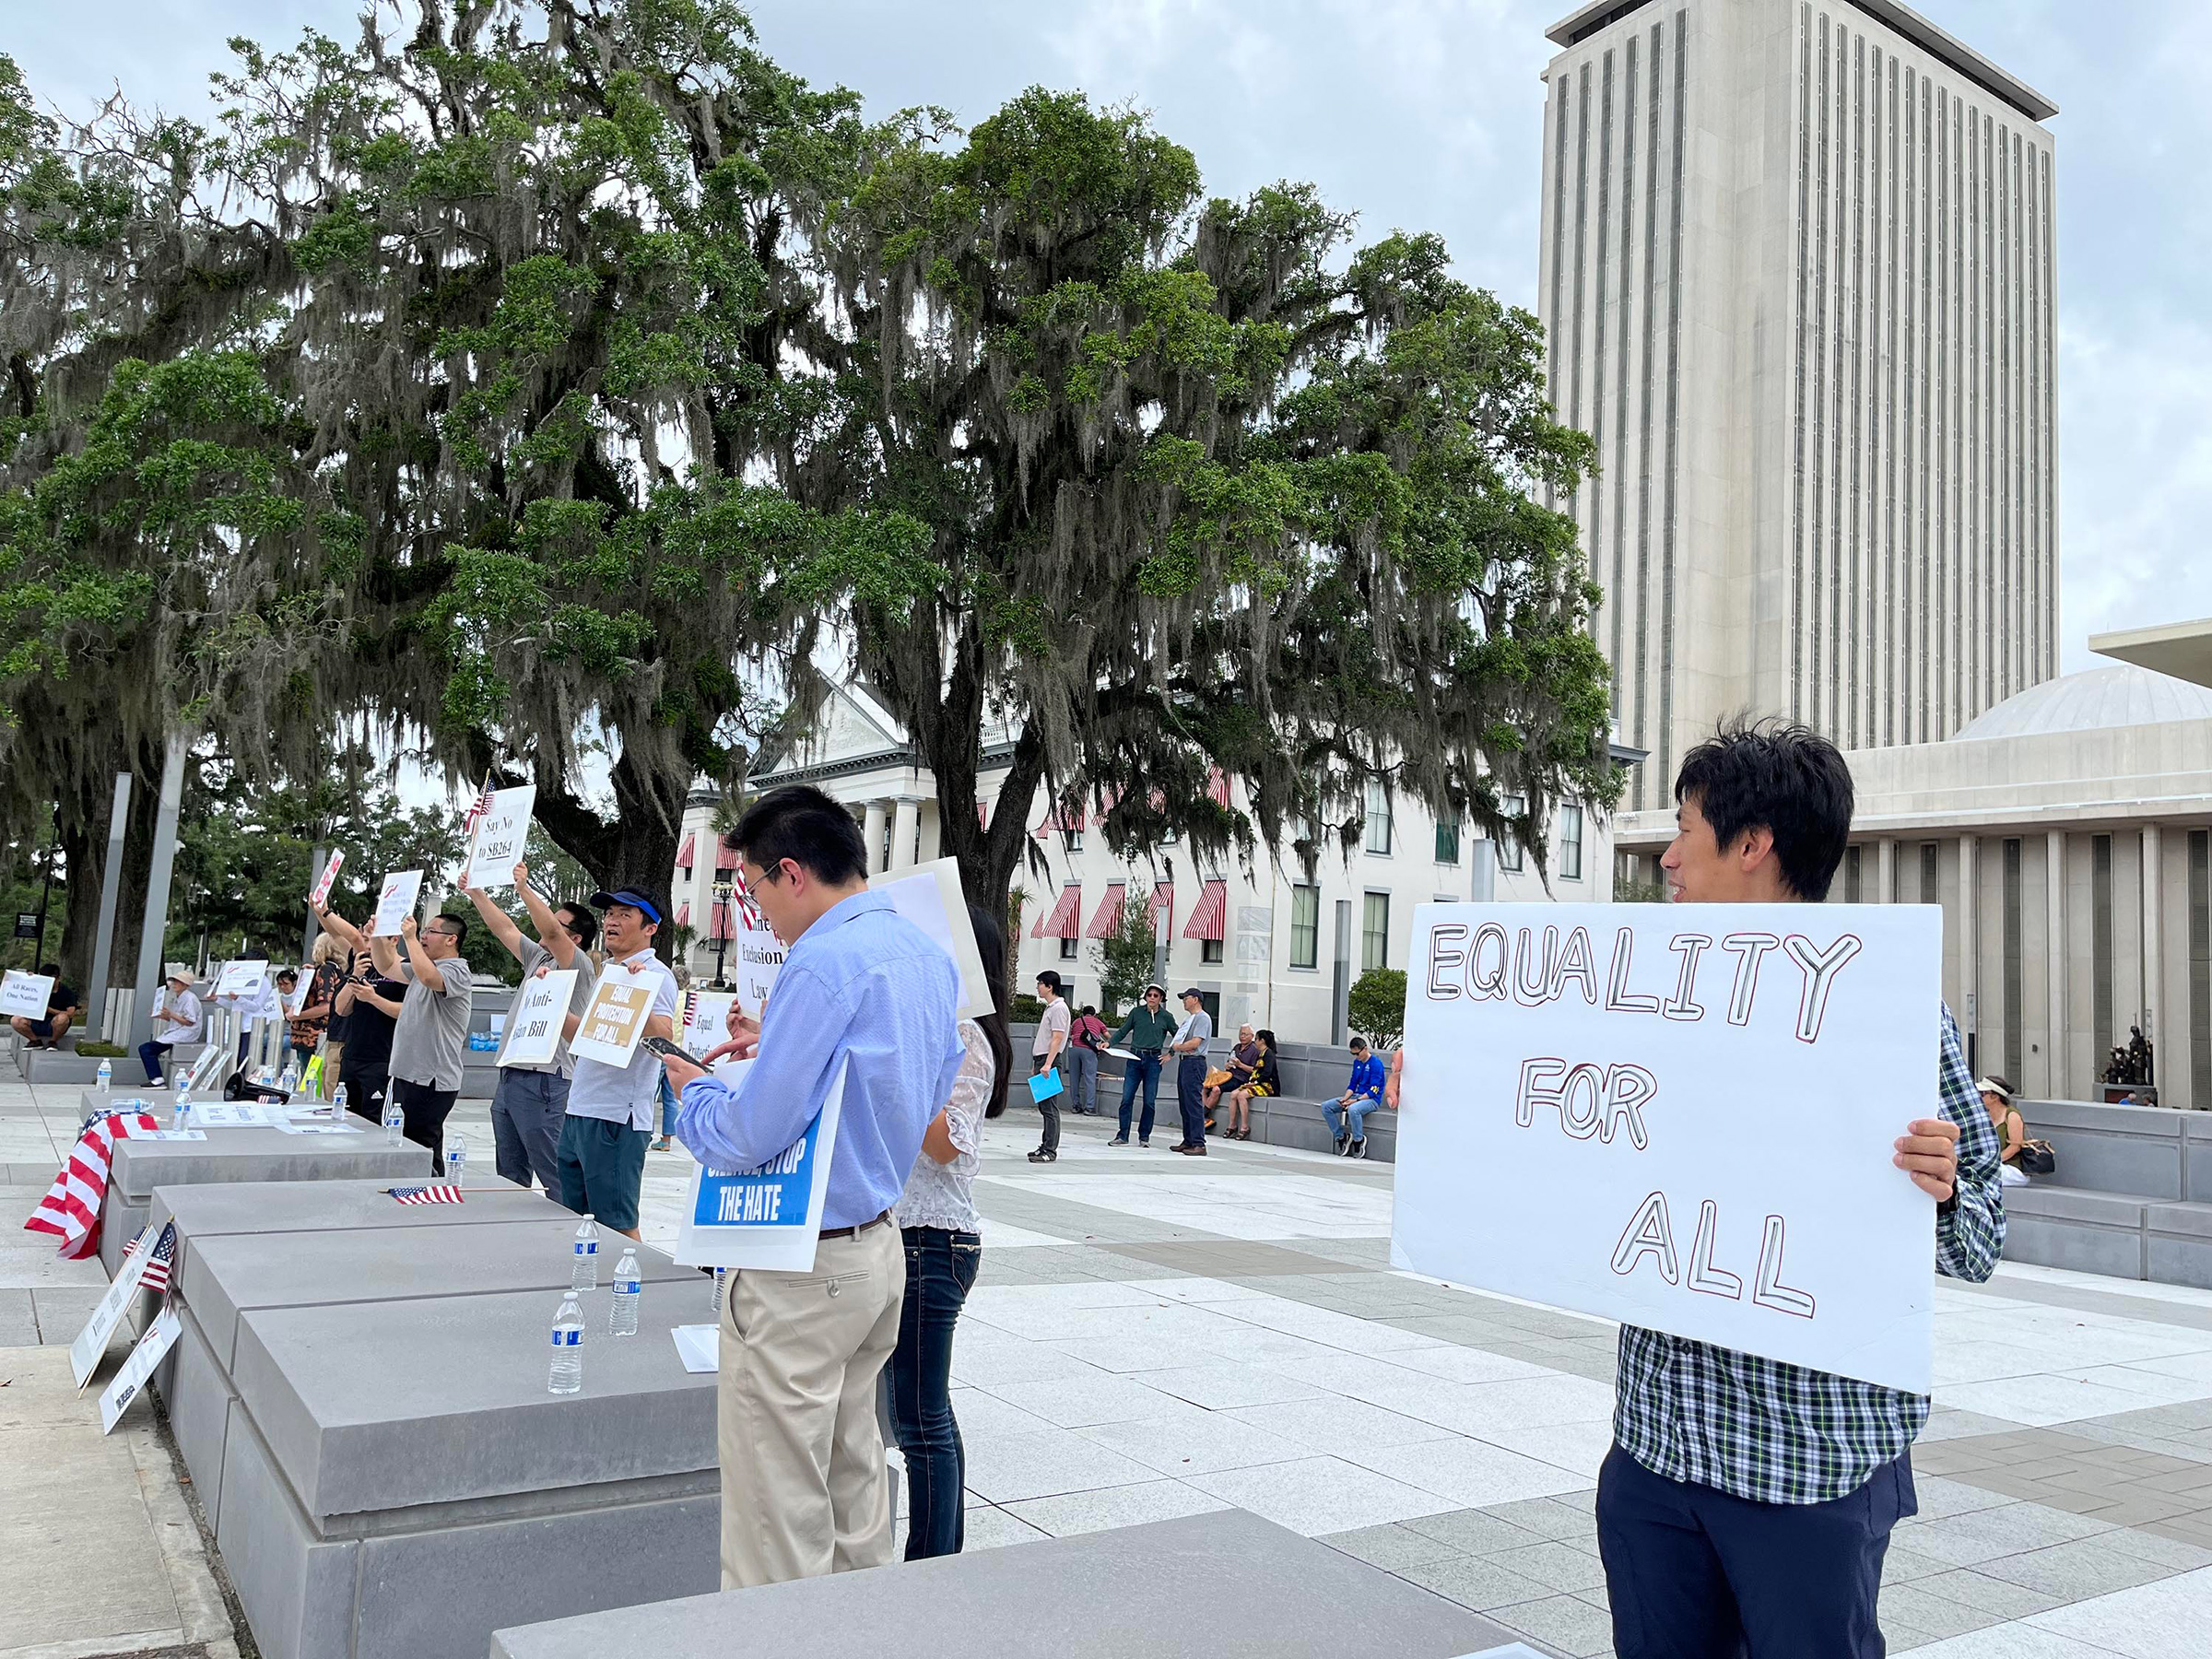 Protesters stand outside Florida's Capitol on April 29, in opposition to a bill that would ban Chinese people who are not U.S. citizens or permanent residents from owning any land or property in the state. (Lawrence Mower—Tampa Bay Times/TNS/ABACA/Reuters)